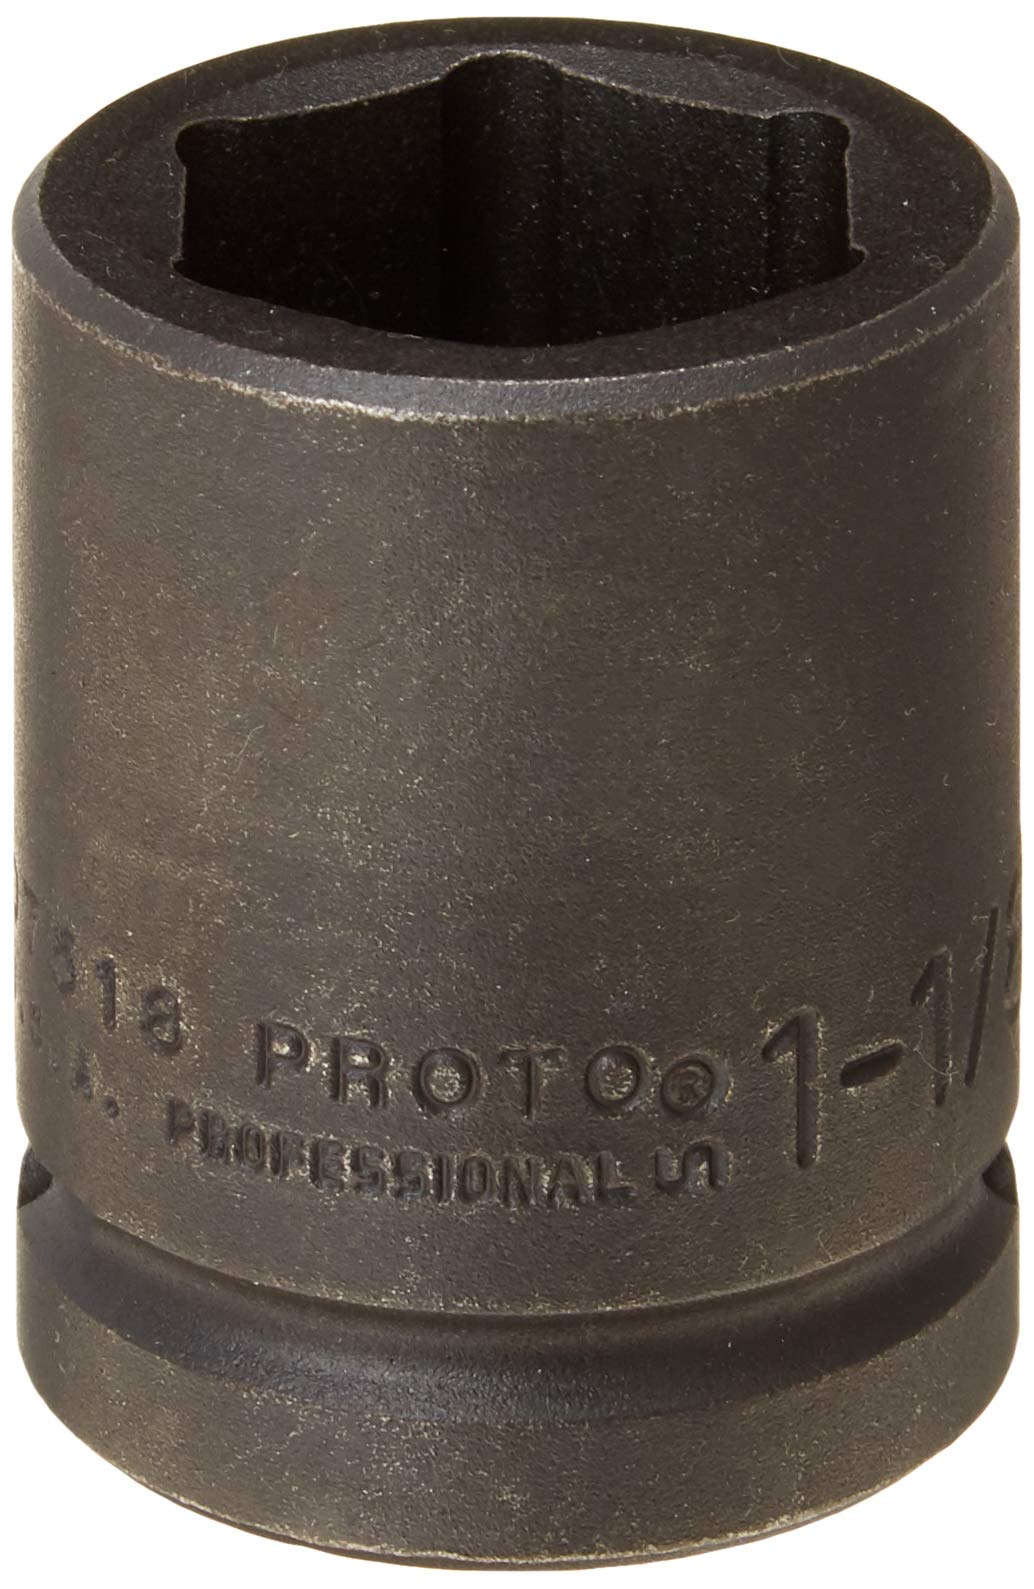 Stanley Proto J74285P 1/2 in. Drive 6 Point 1-1/8 in. SAE